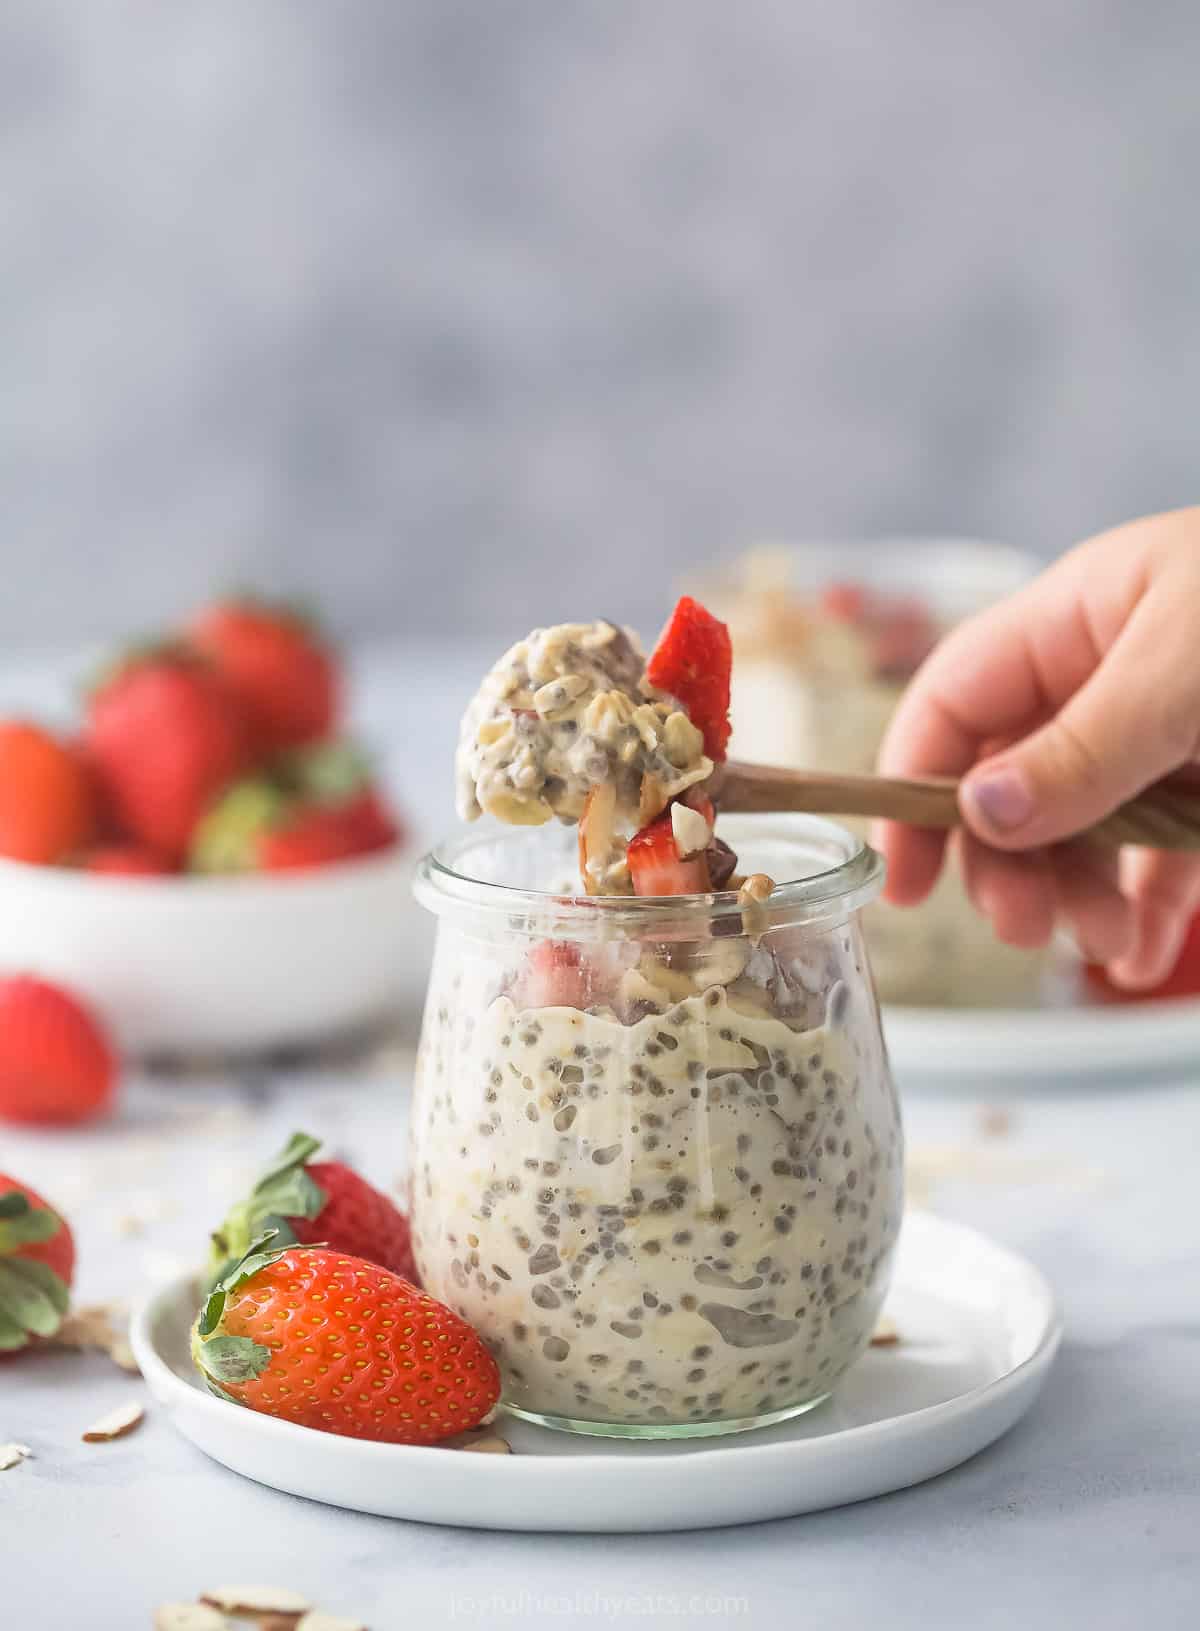 A wooden spoon holding a bite of overnight oatmeal over a glass jar on a plate